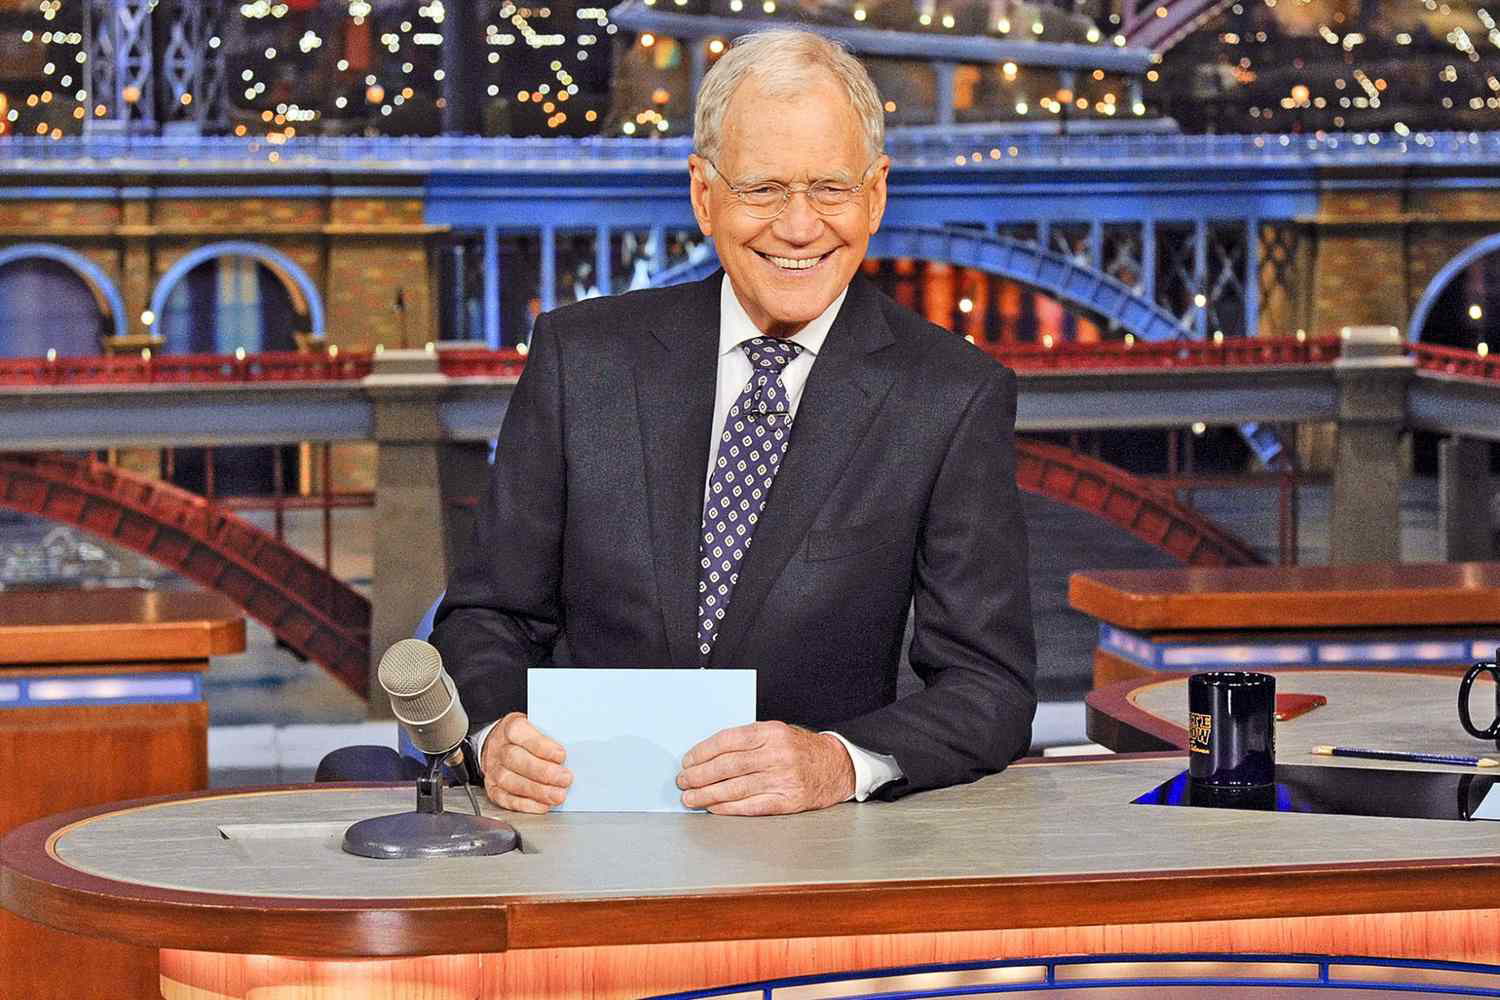 David Letterman hosted The Late Night from 1982 to 1993 | NBC